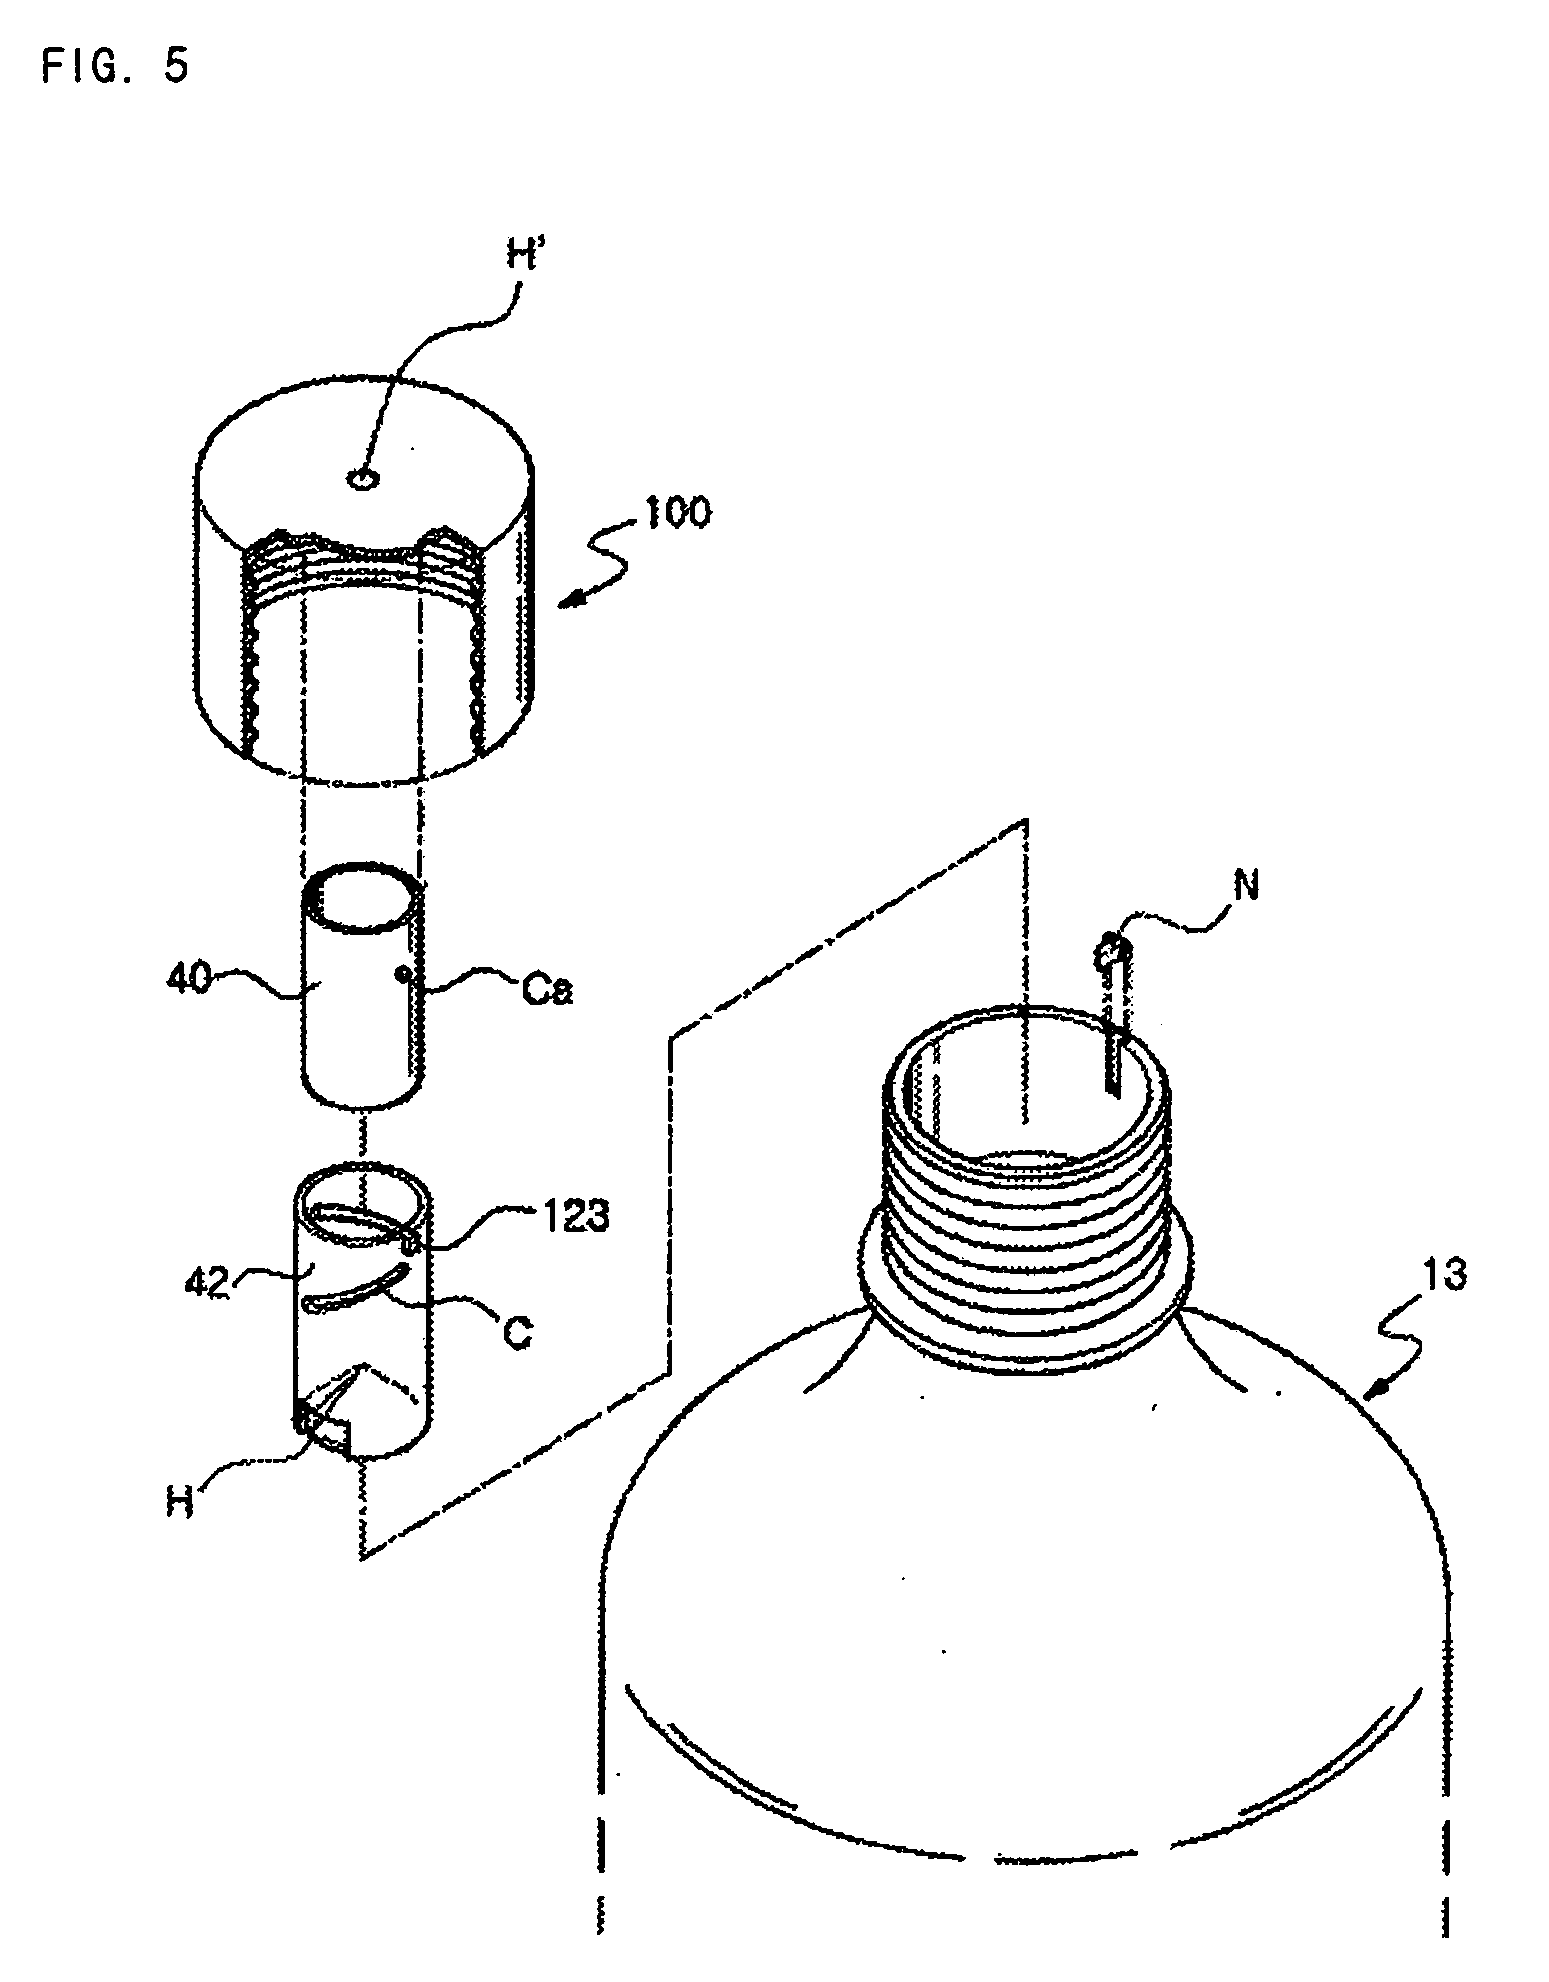 Cap device for mixing different kinds of substances separately kept therein within a container